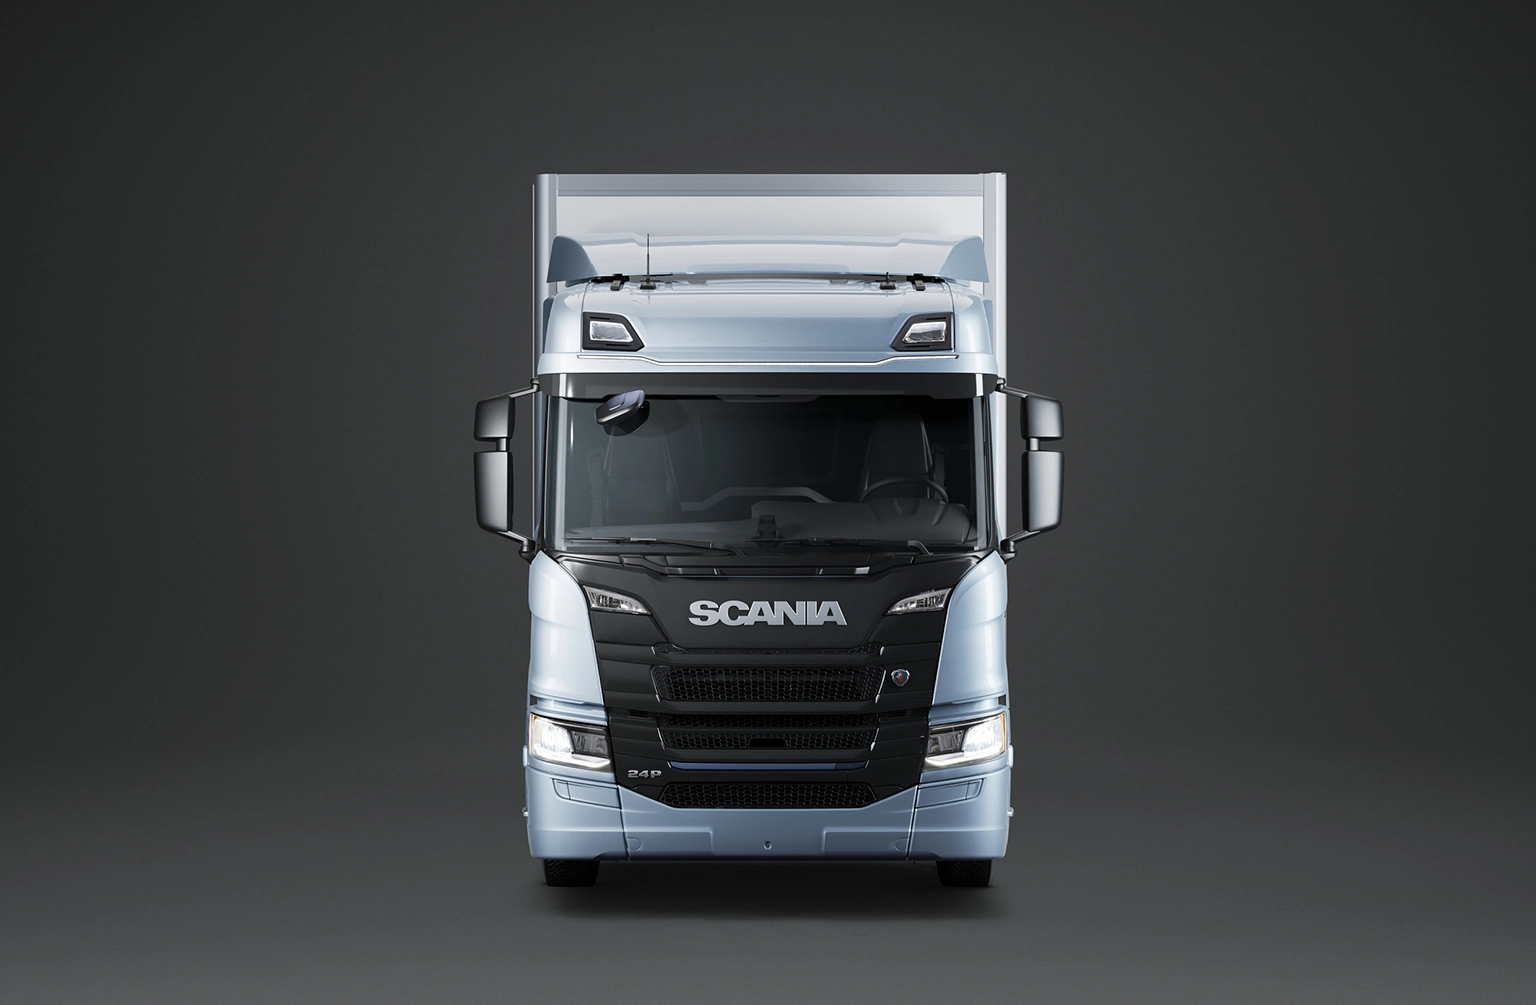 Scania Is Adding More Solutions To Its Electric Truck Range